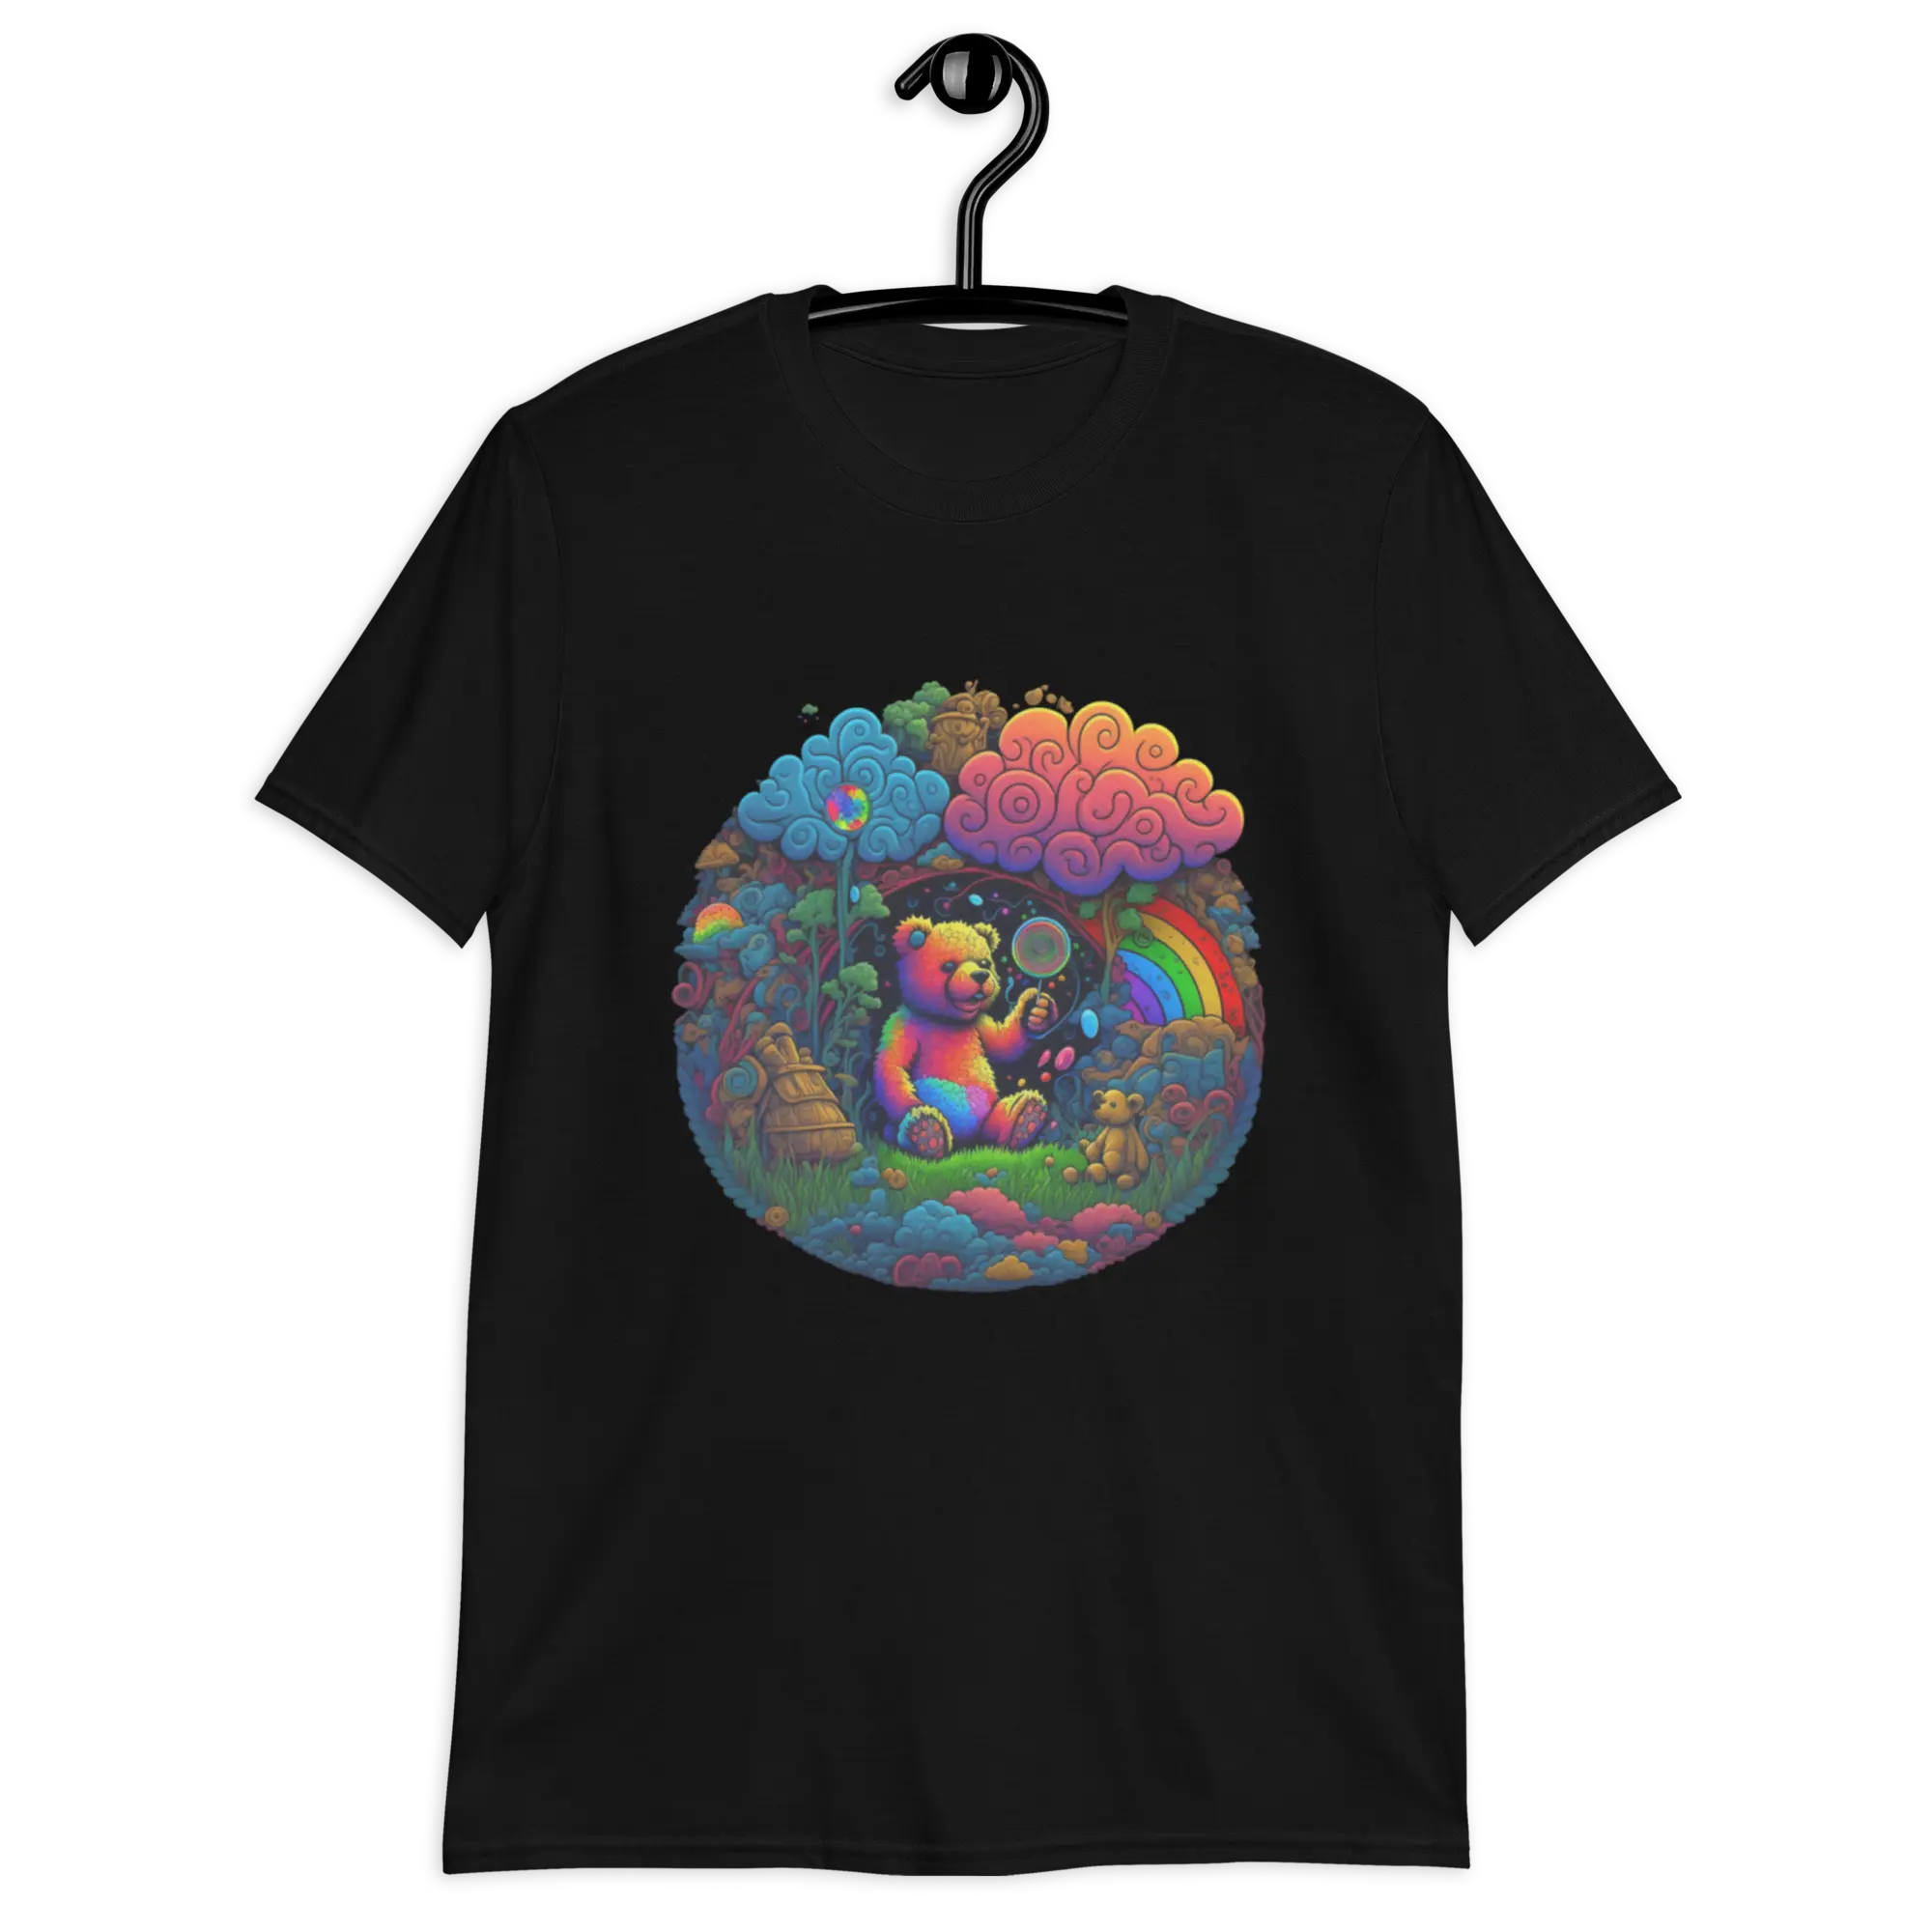 Stoned Bears is the ultimate destination for unique and funny T-shirts. Our custom designs are made from high-quality materials and come in a variety of sizes and styles. Shop our collection of graphic tees and vintage T-shirts 